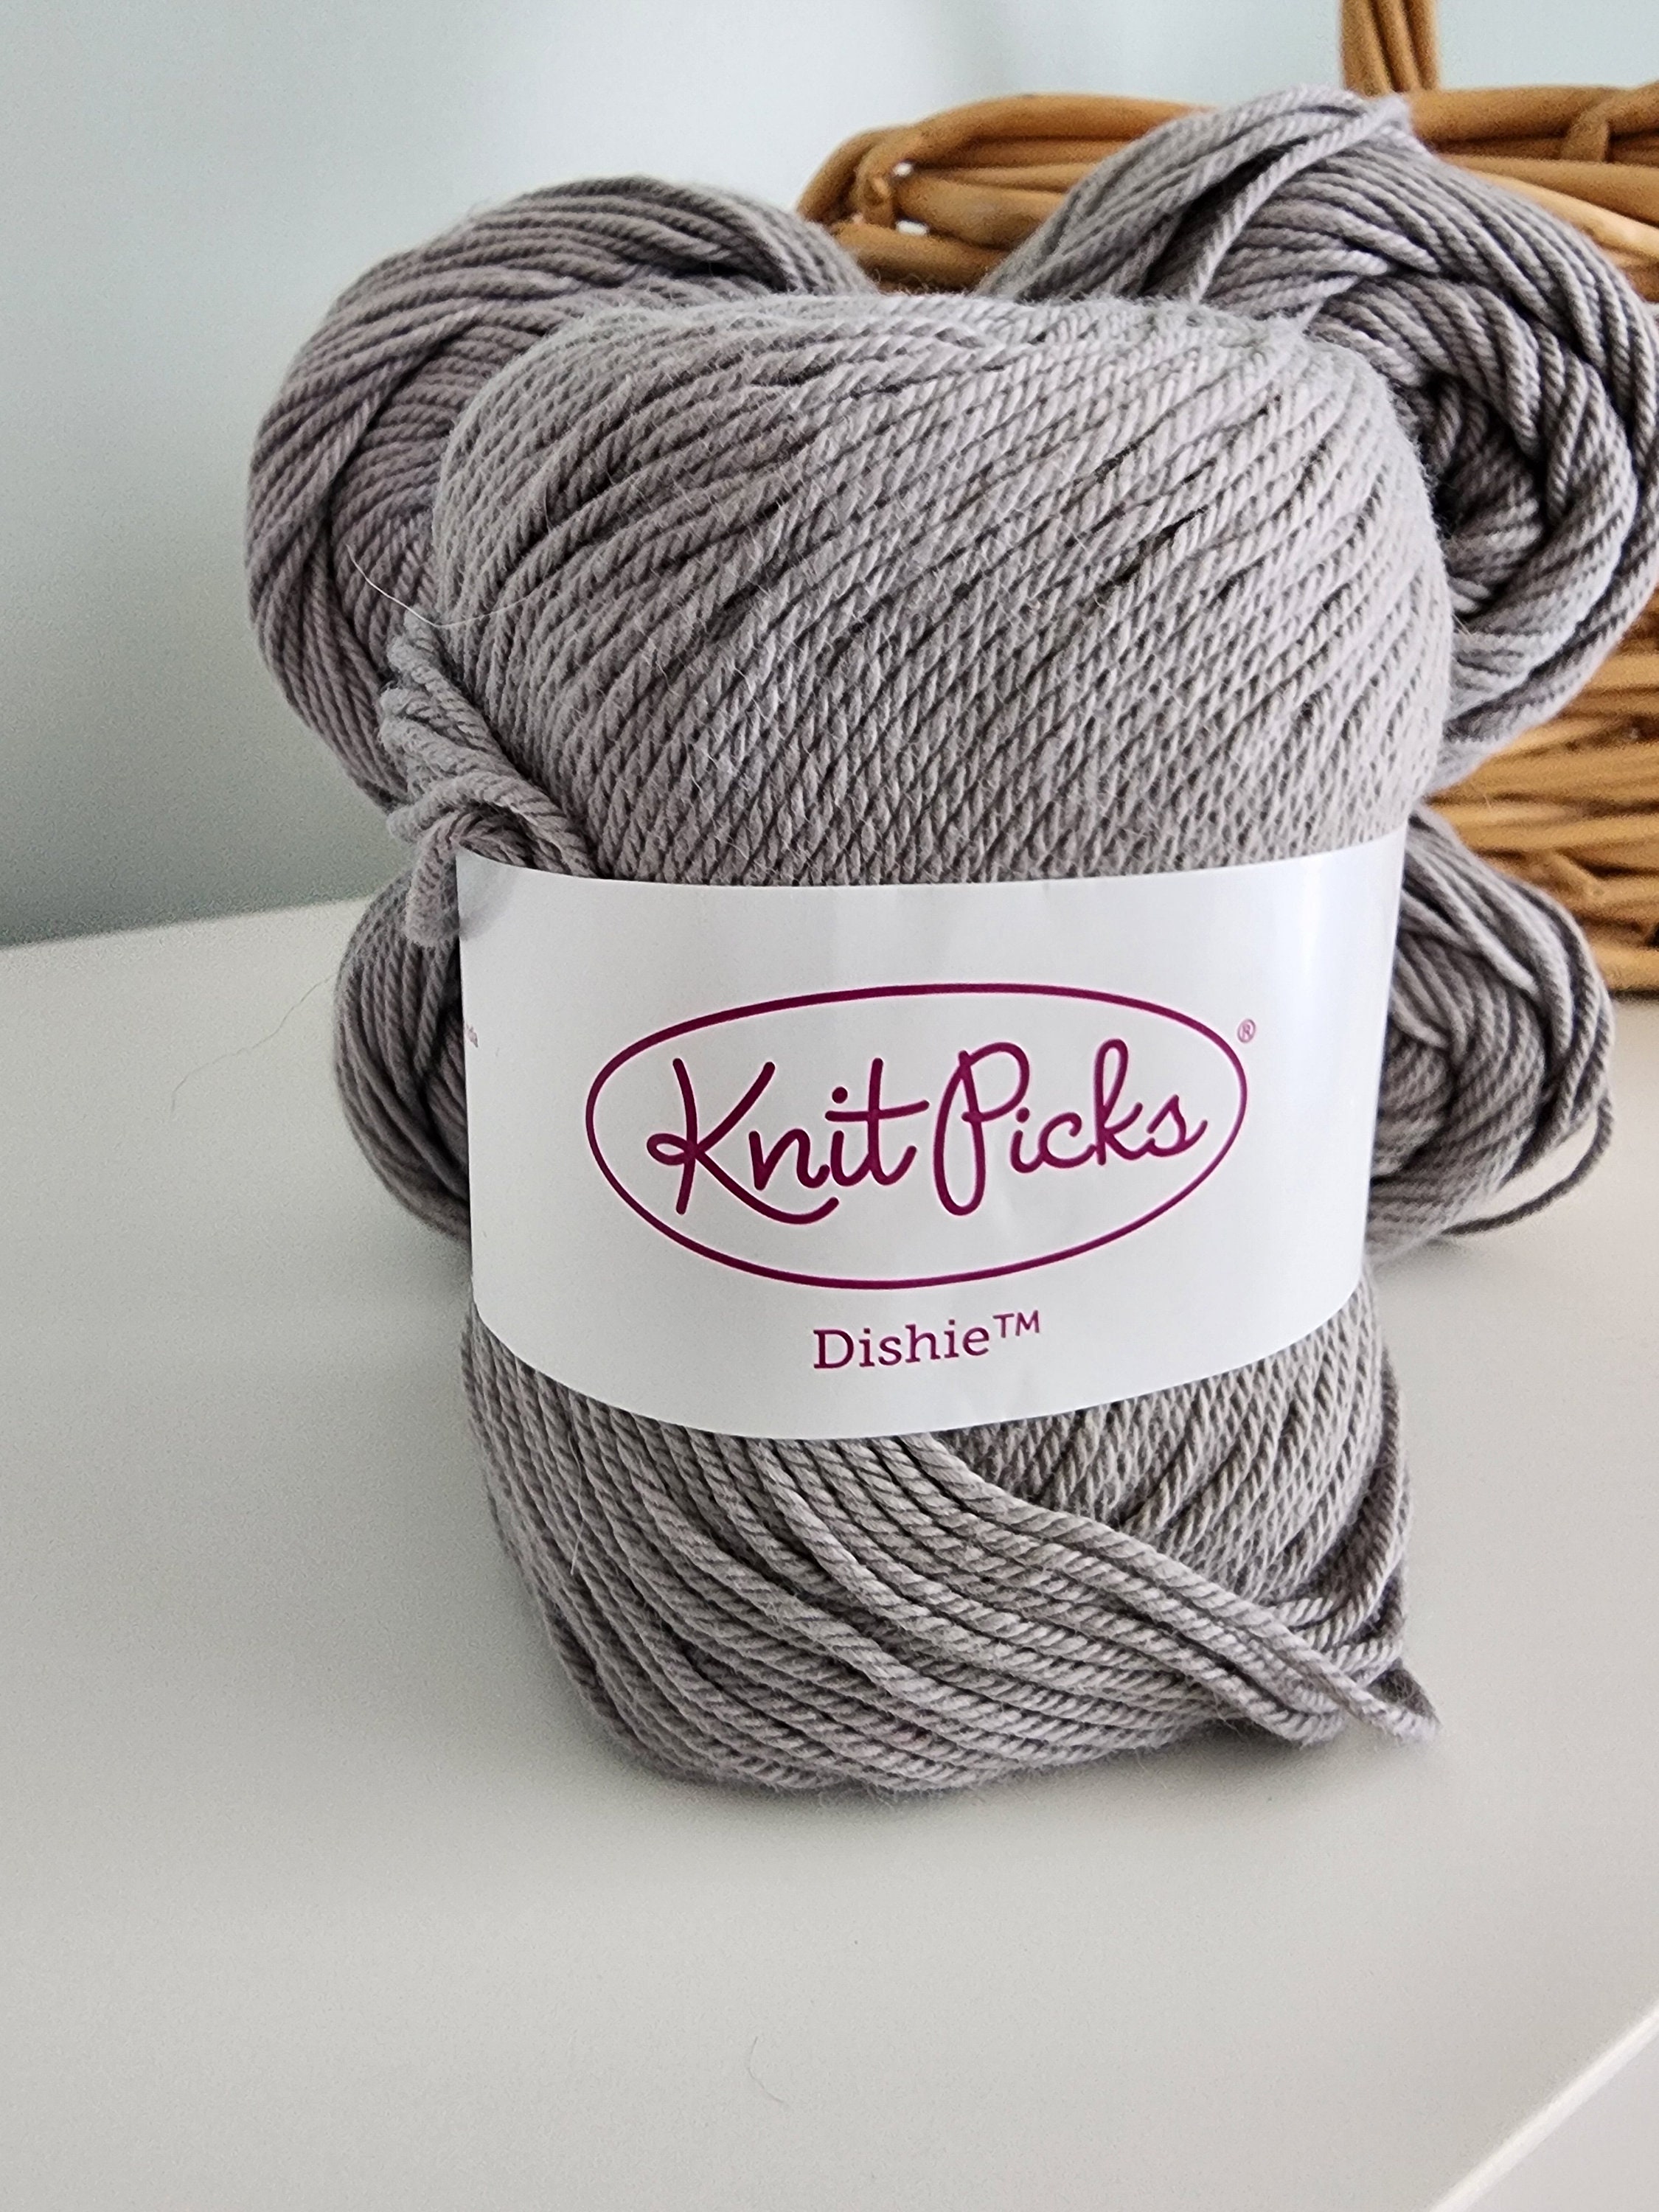  Knit Picks Dishie Worsted Weight 100% Cotton Yarn Cone - 400 g  (Silver)